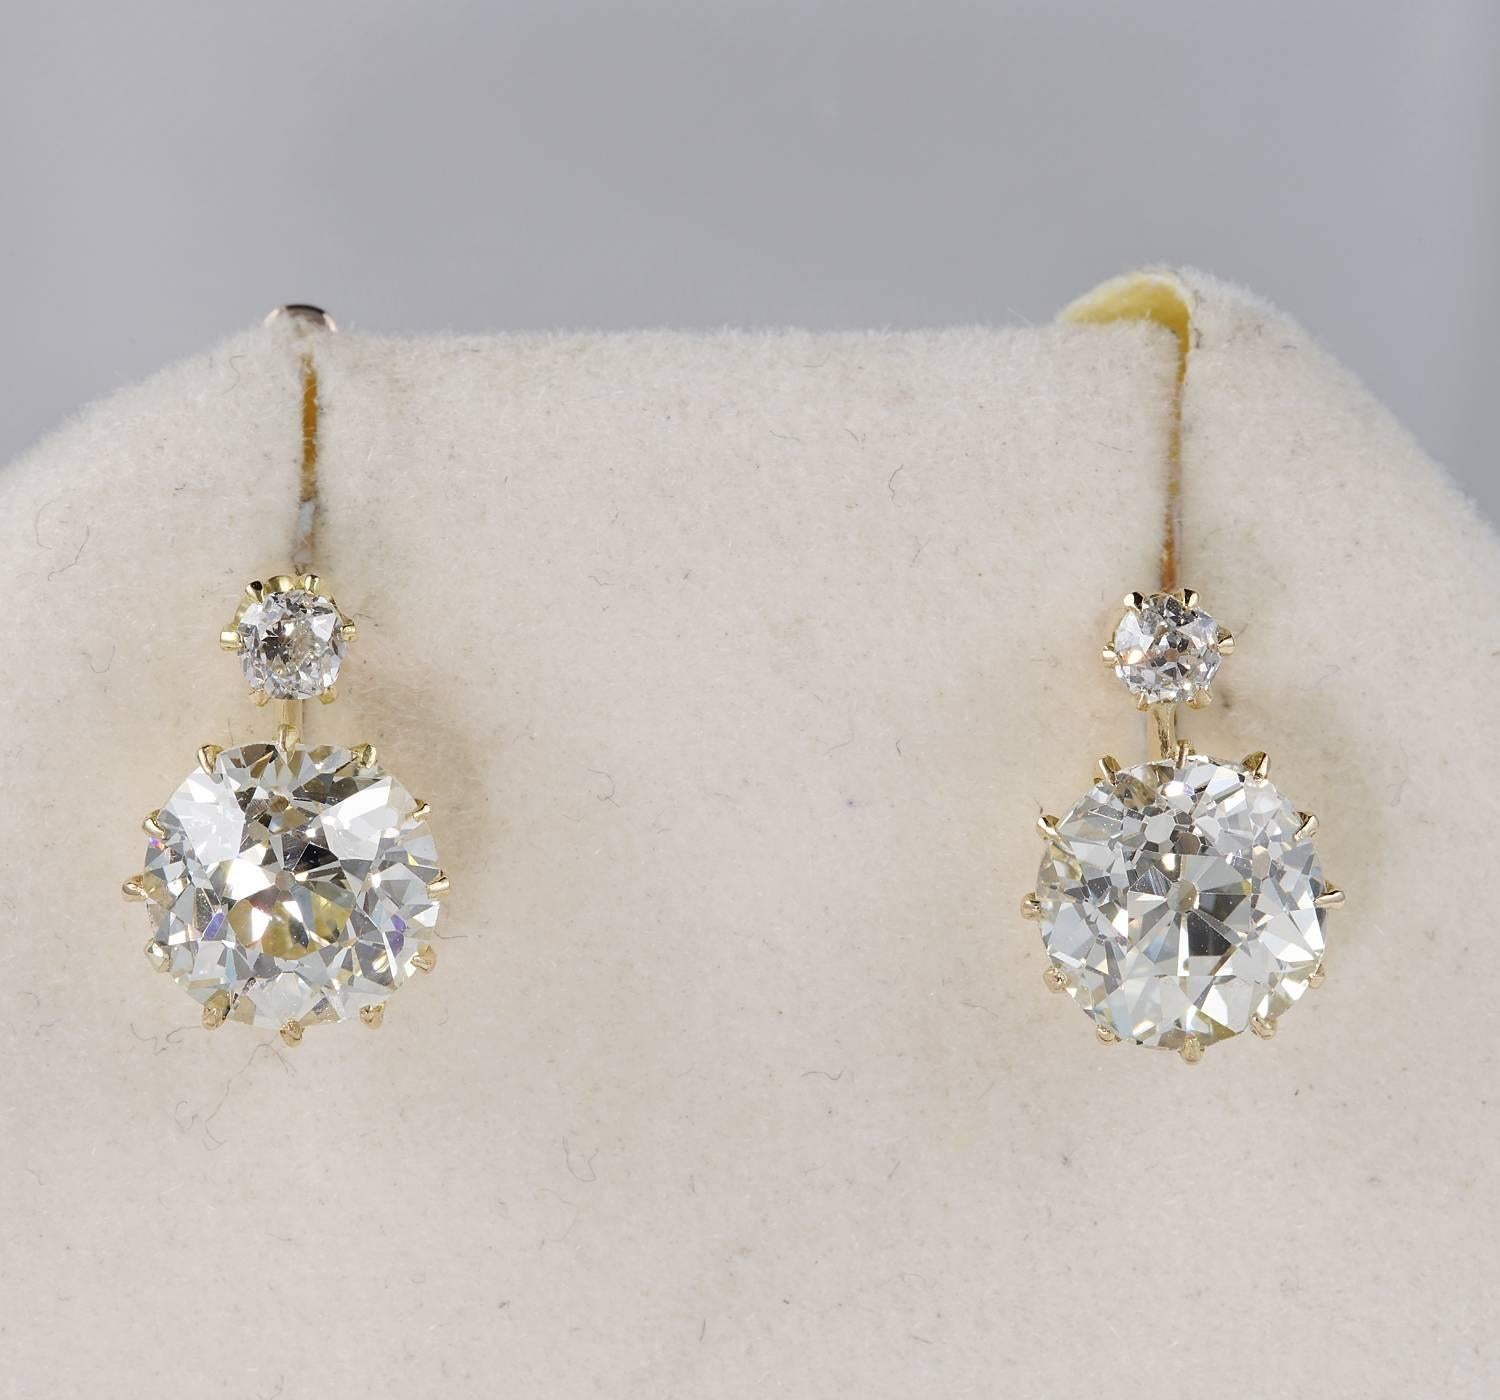 Magnificent pair of authentic Victorian Diamond solitaire drop earrings
Centrally set with a spectacular pair of early old European cut Diamonds of excellent size, clarity and colour
The two main Diamonds have 3.90 Carat weight together (average